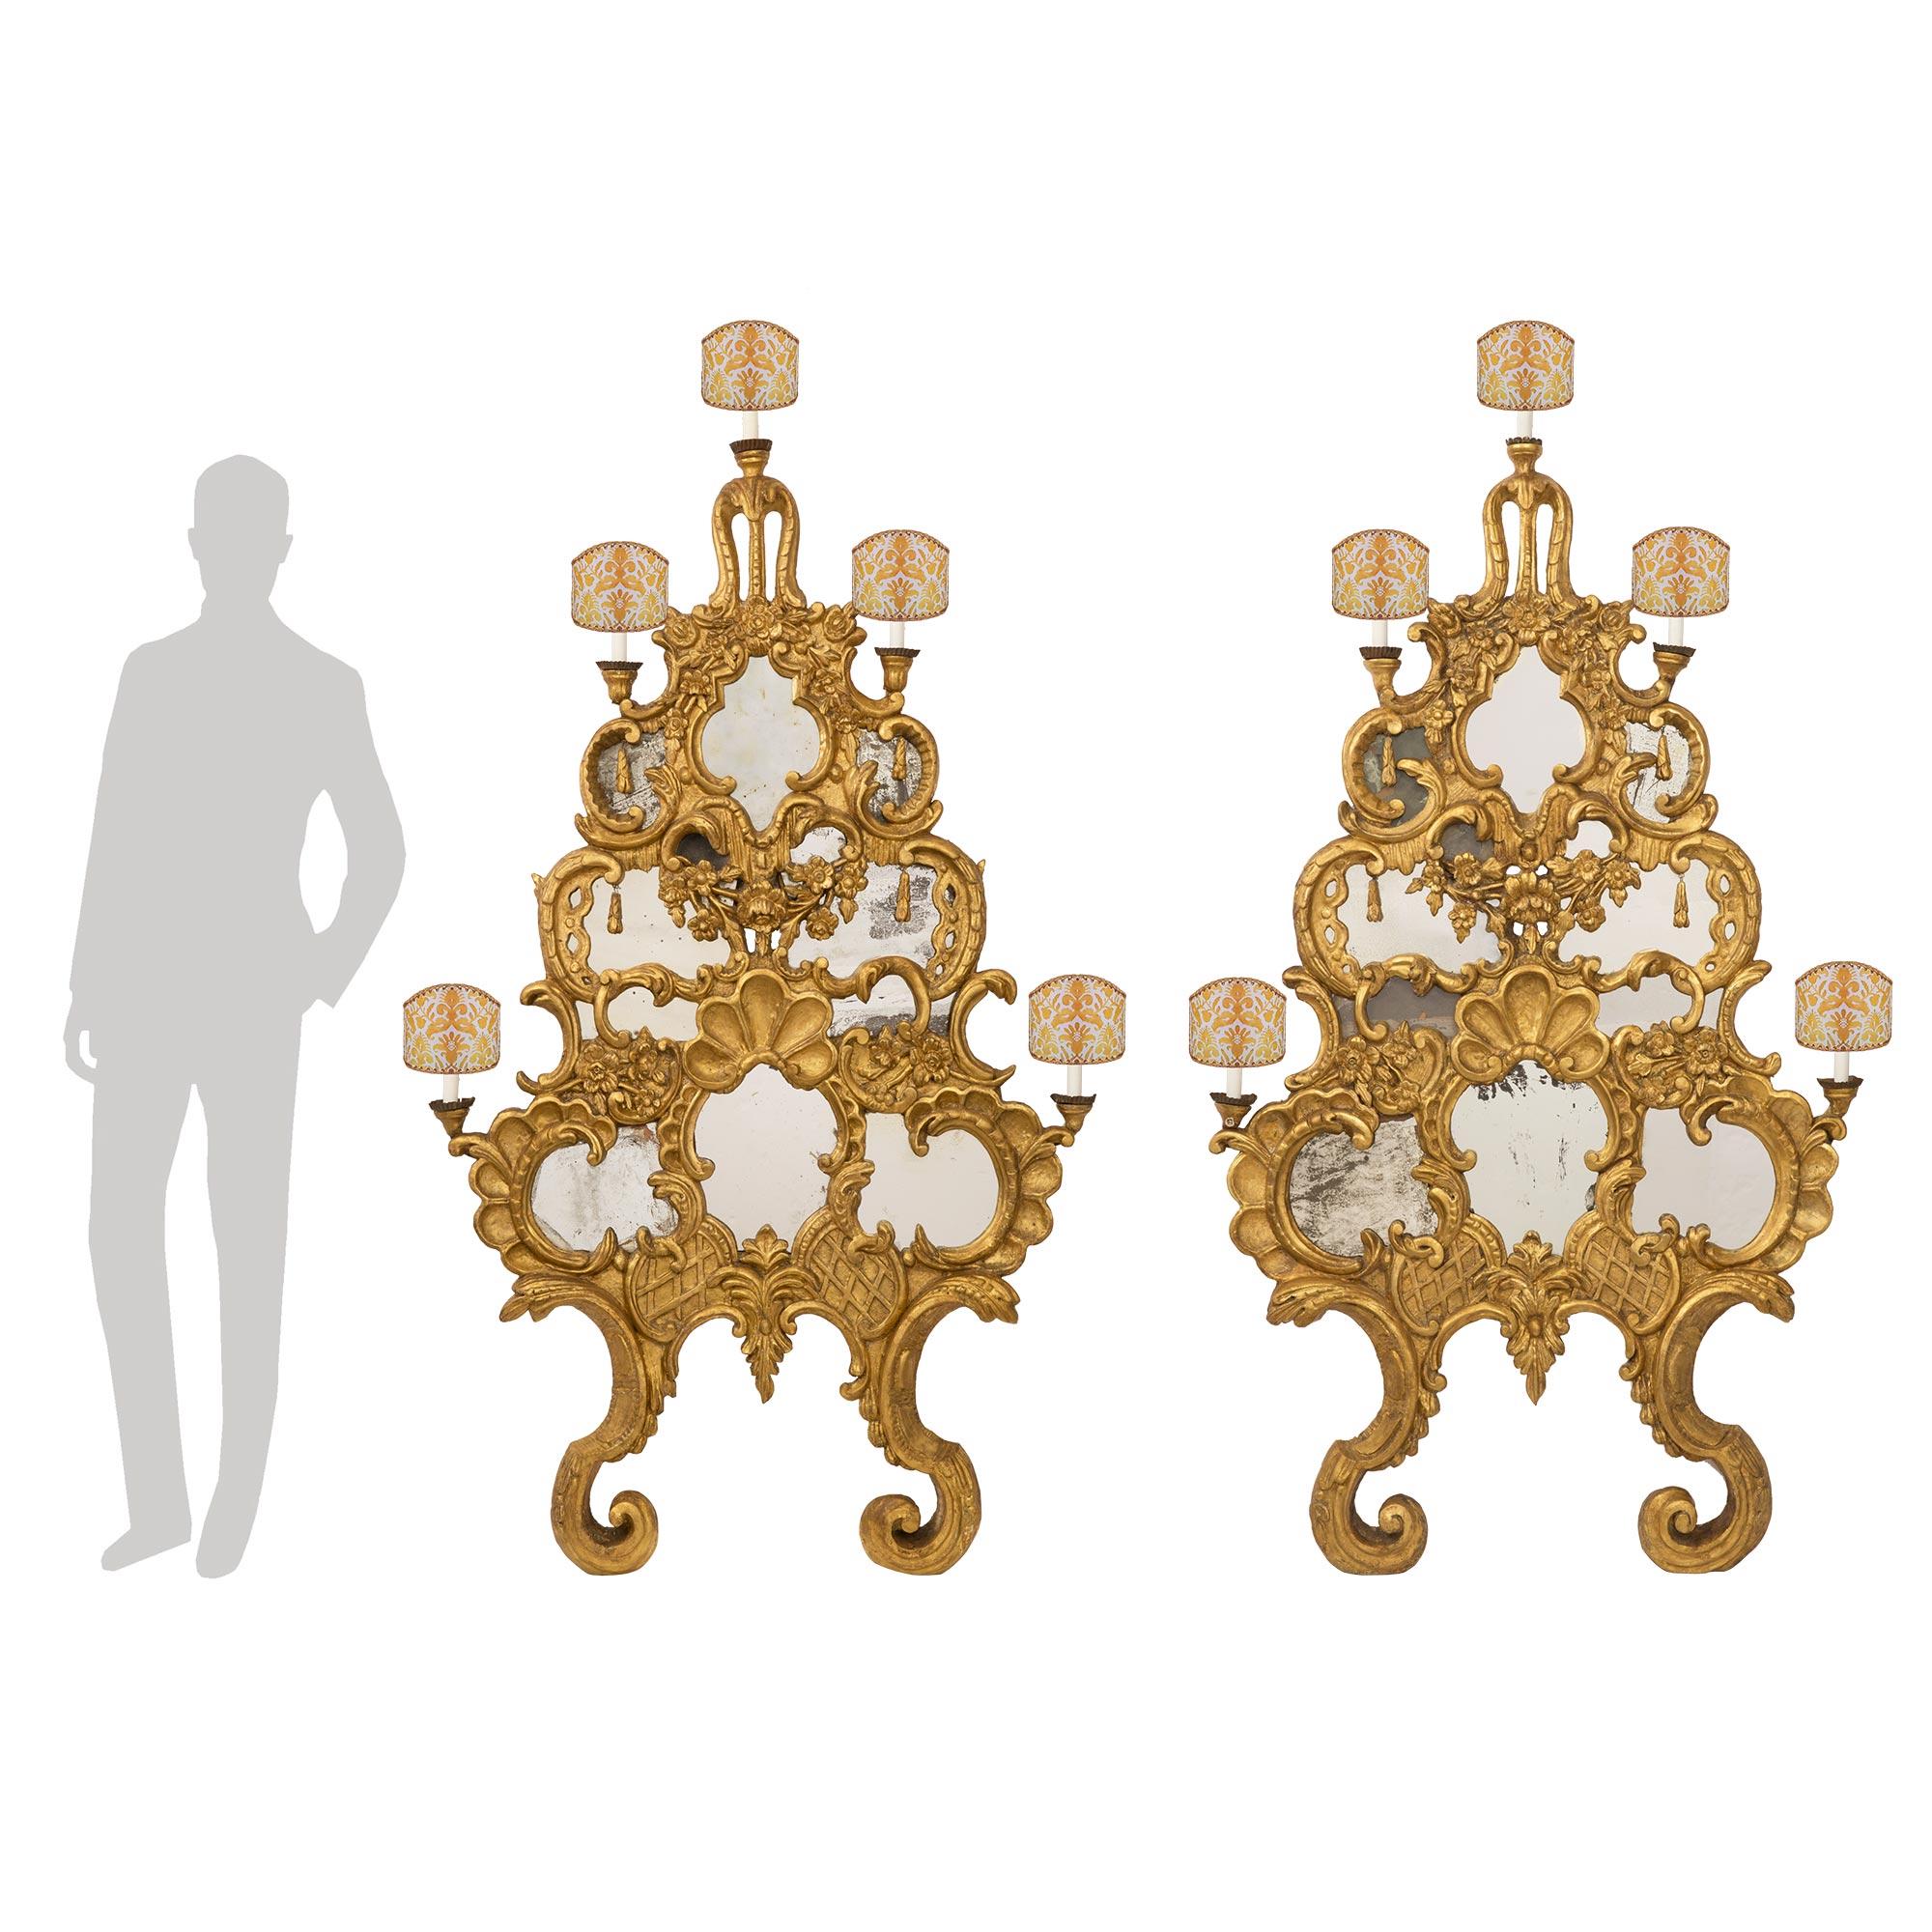 A sensational monumental pair of Italian mid-18th century, five light, mirrored giltwood Baroque sconces from Venice. Each extremely decorative sconce has elegant scrolled bottom supports, with beautiful foliate designs throughout. Each individual